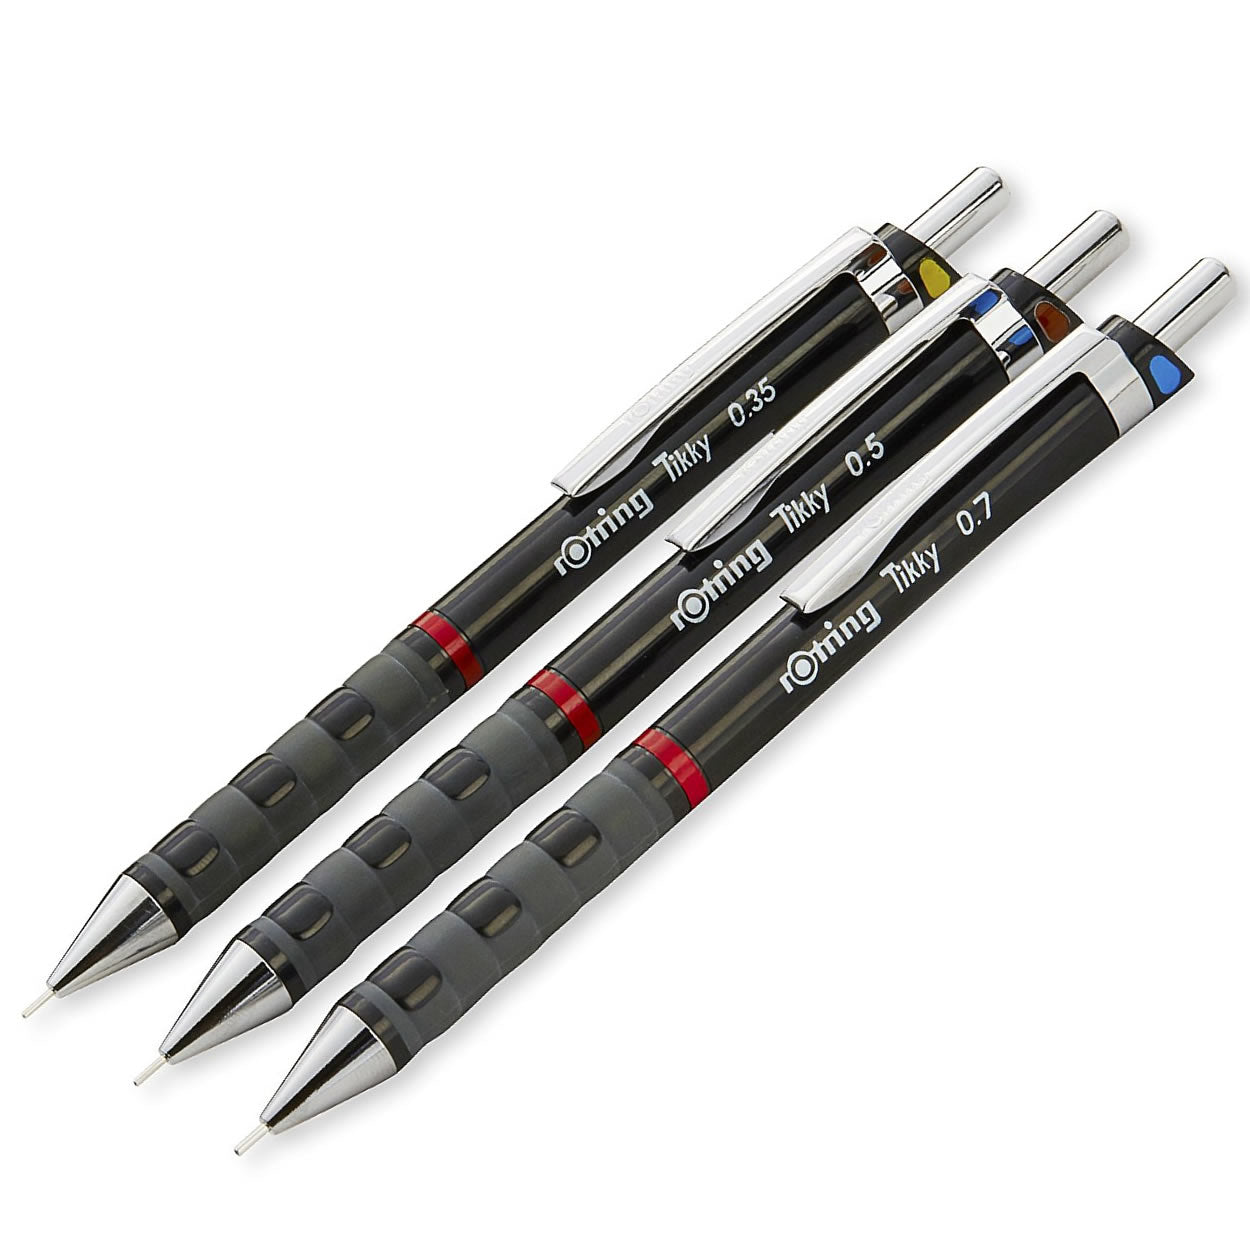  Rotring Tikky Mechanical Pencil 0.7 mm Black With Colour  Coding - 1904696-2 Pieces : Office Products